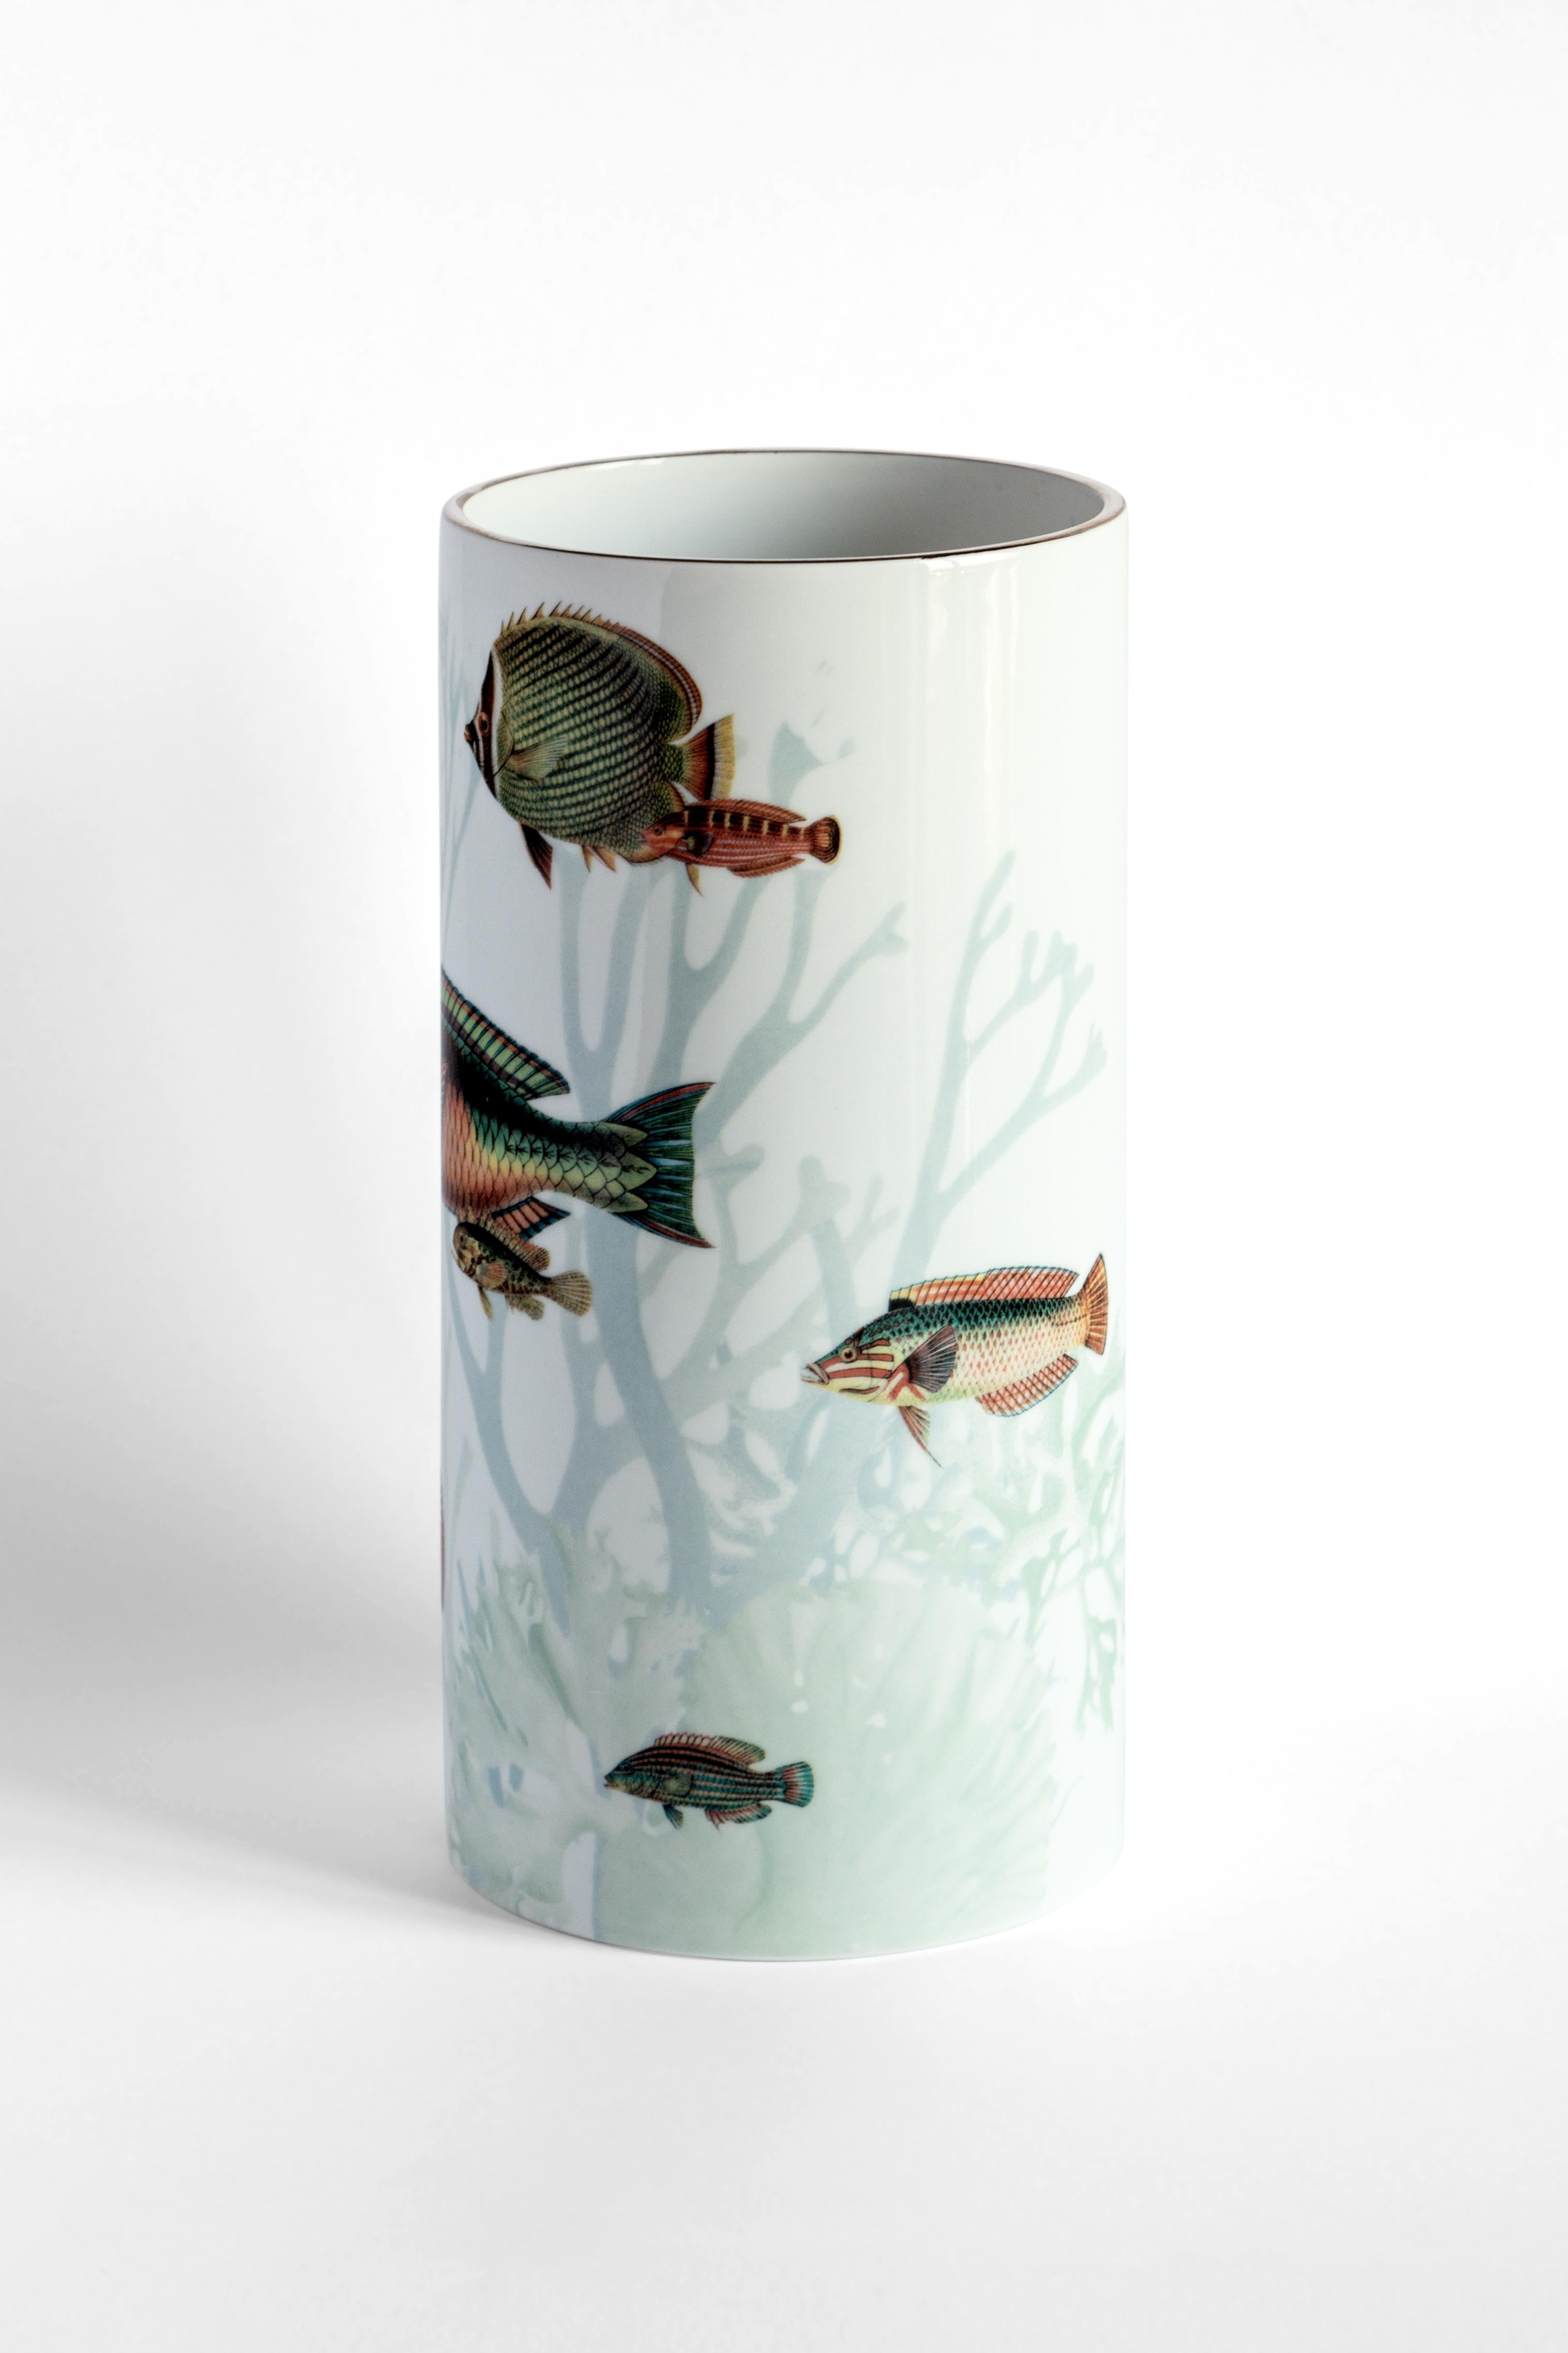 Inspired by the Japanese Amami Islands ringed by coral reefs, this joyful vase designed by Vito Nesta features a playful pattern of different-sized fish in dazzling colors. Crafted of fine porcelain, this vase will make a delightful addition to a